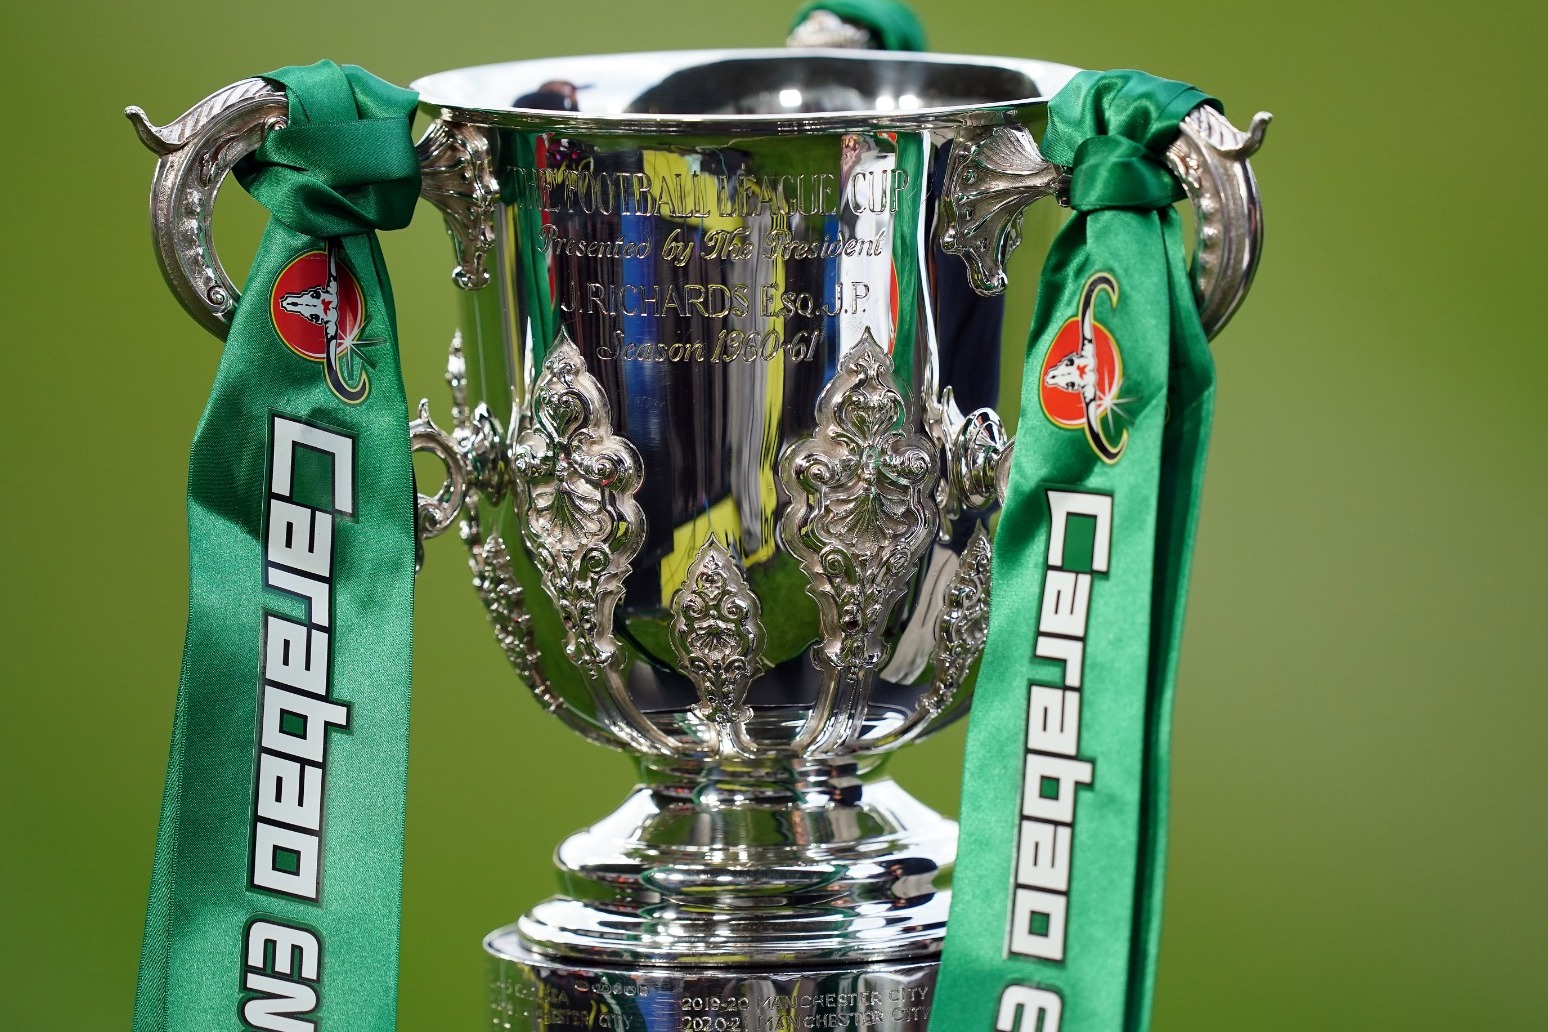 Chelsea and Liverpool avoid each other in Carabao Cup draw 